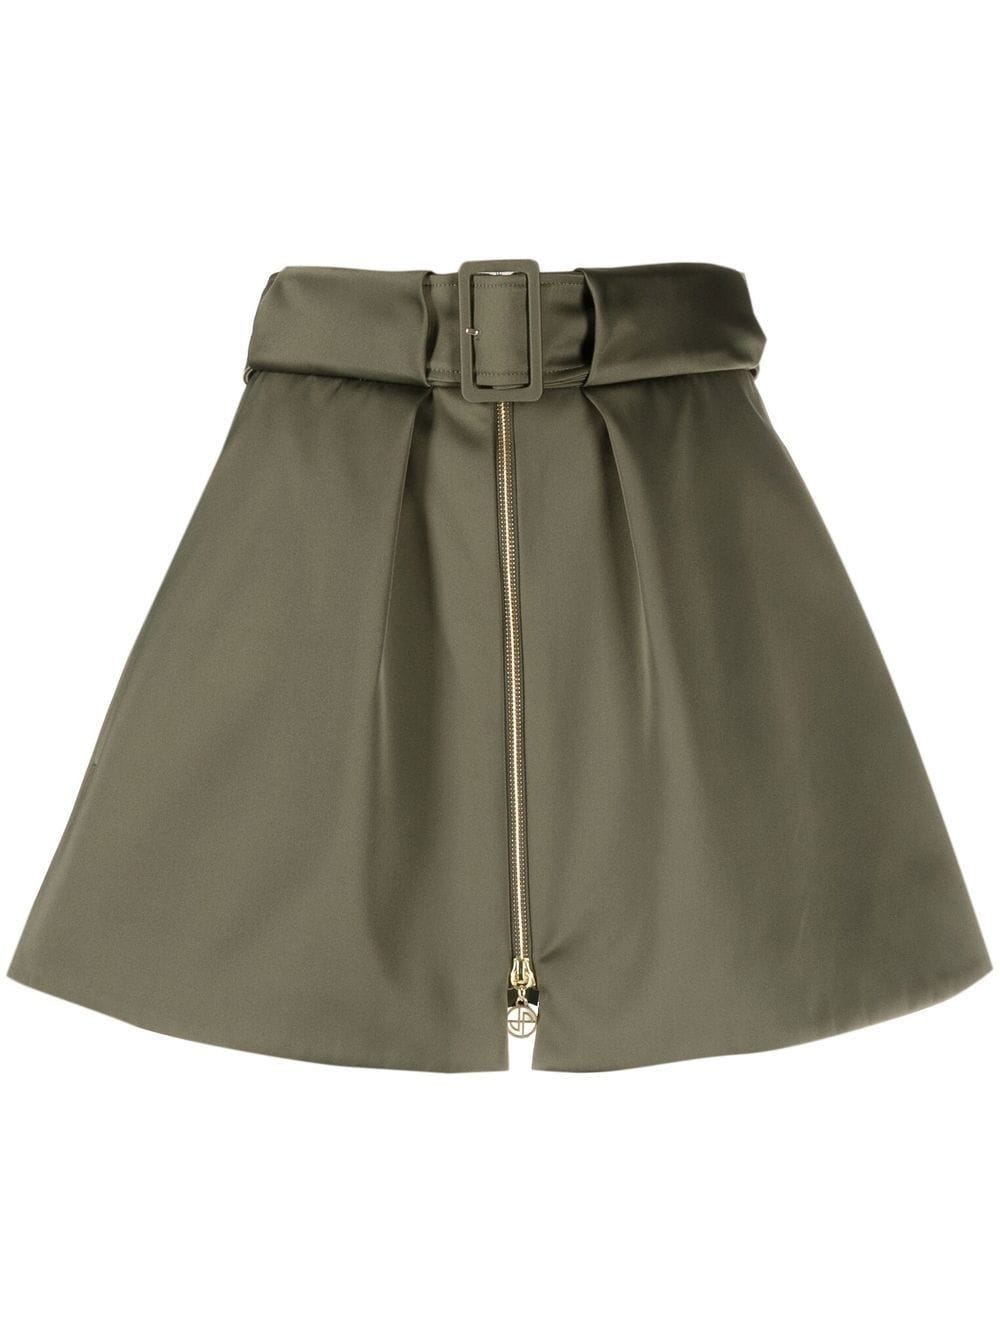 PATOU GREEN FLARED MINI SKIRT WITH BELT AND ZIPPER